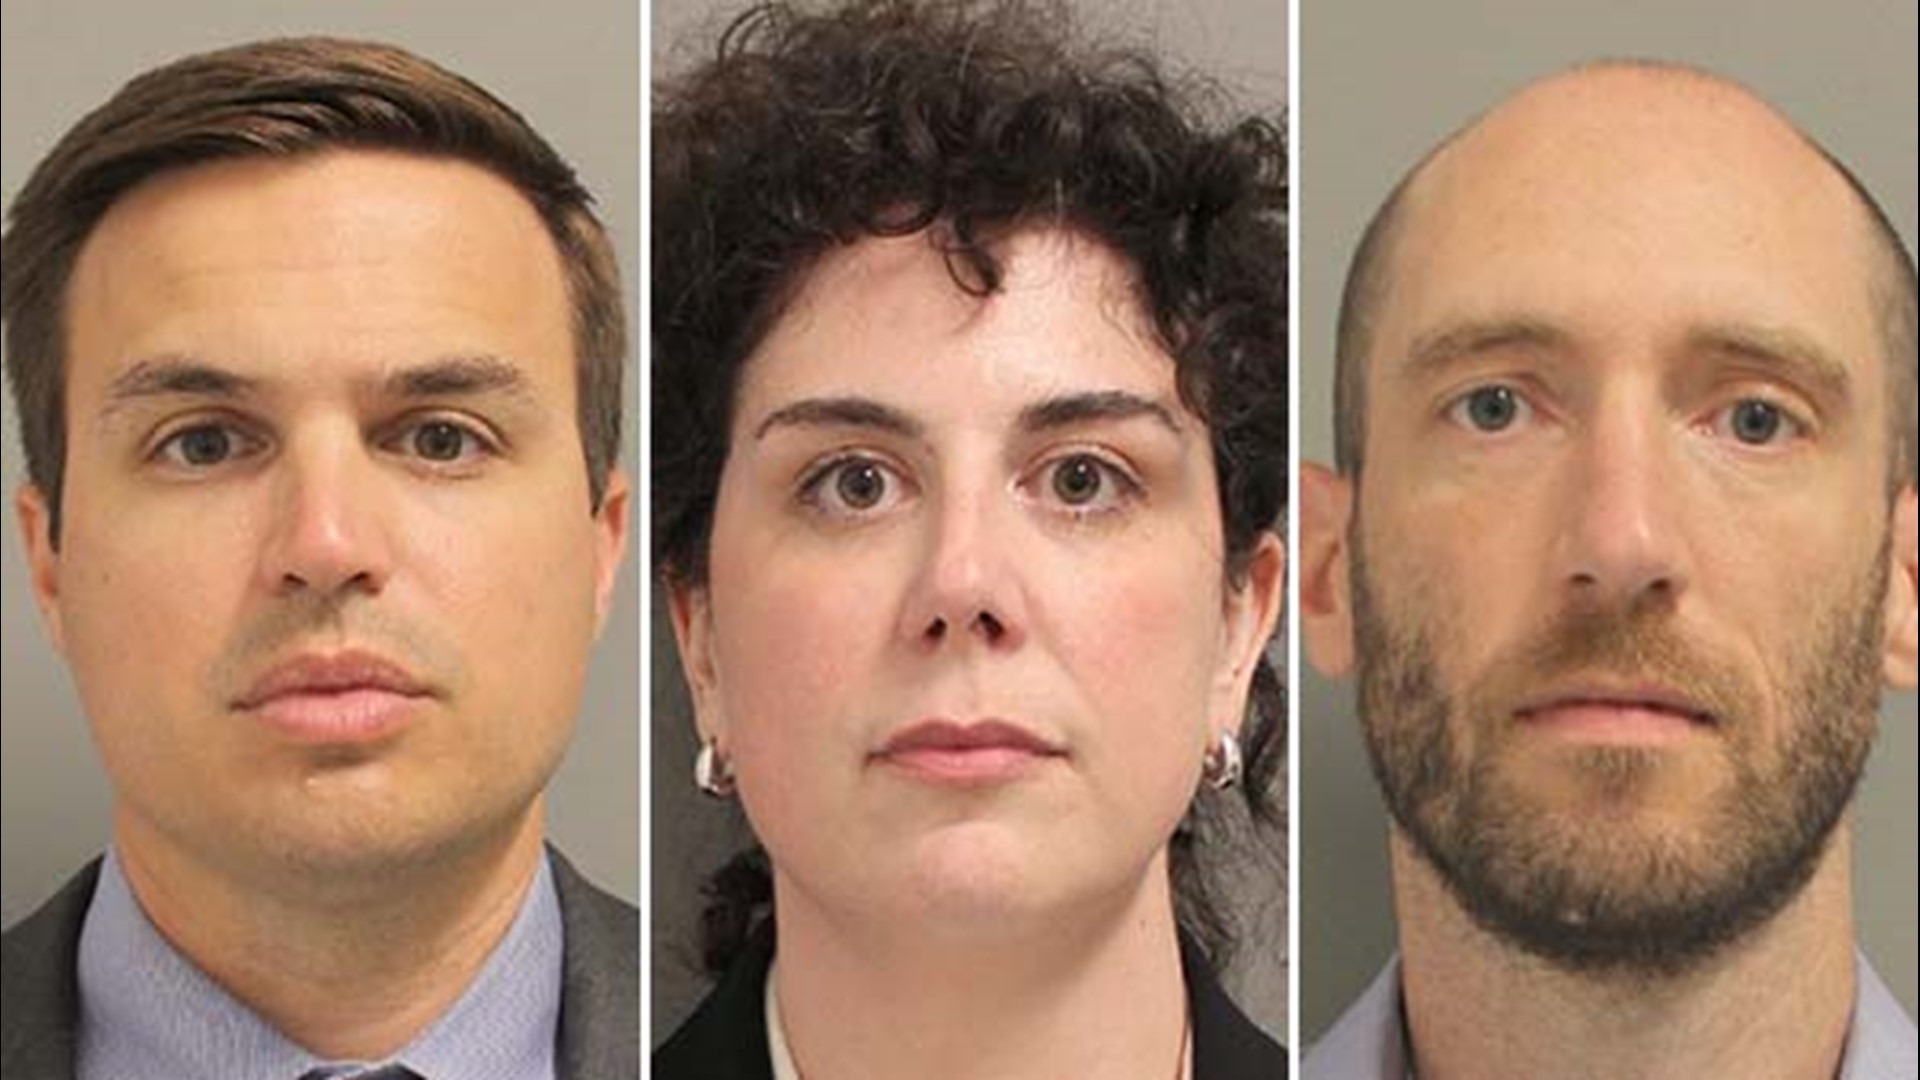 Alex Triantaphyllis, Wallis Nader and Aaron Dunn appeared in court today on charges of misuse of official information and tampering with a government record.